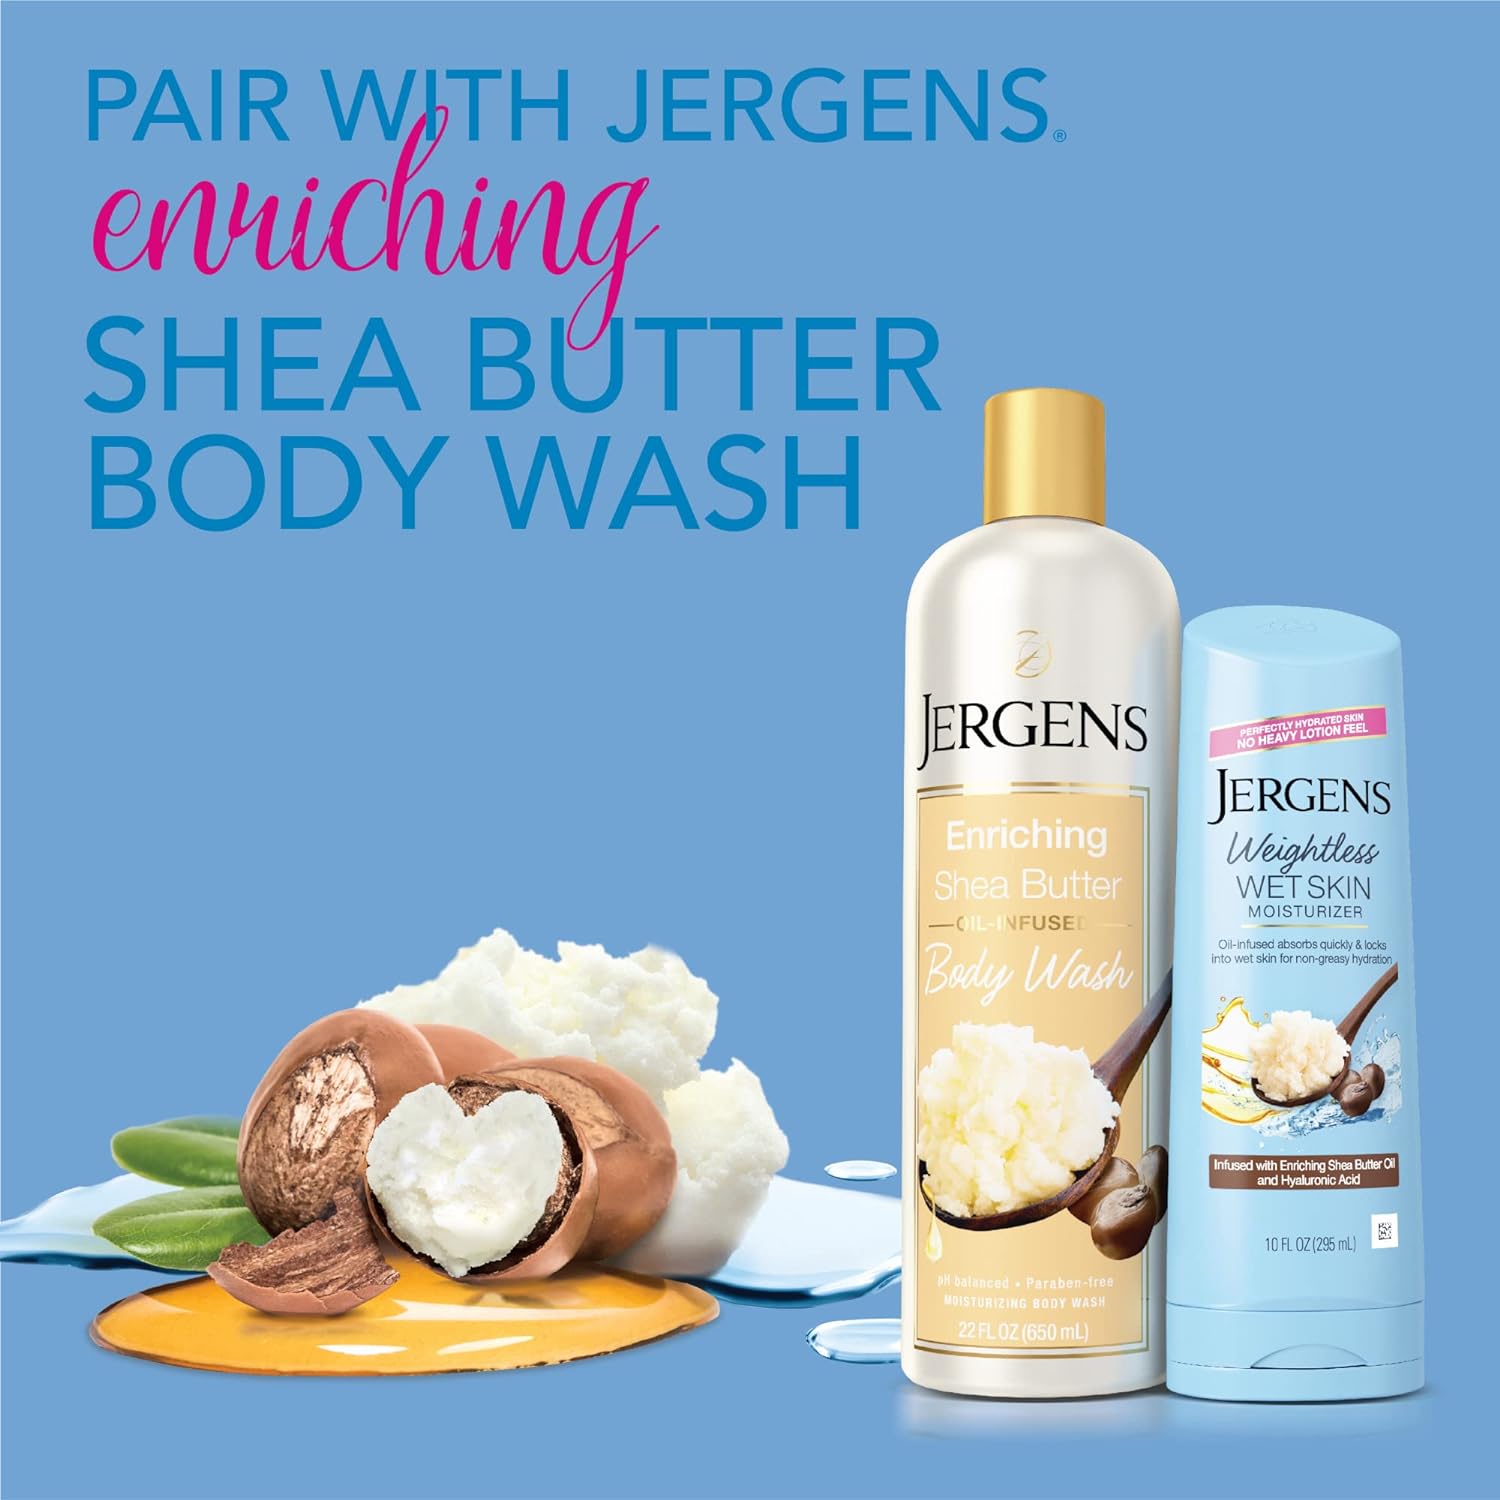 Jergens Wet Skin Body Moisturizer with Shea Butter Oil, Pure Shea Butter In Shower Lotion, Moisturizer for Dry Skin, Fast-Absorbing, Non-Sticky, 10 oz, Dermatologist Tested : Beauty & Personal Care